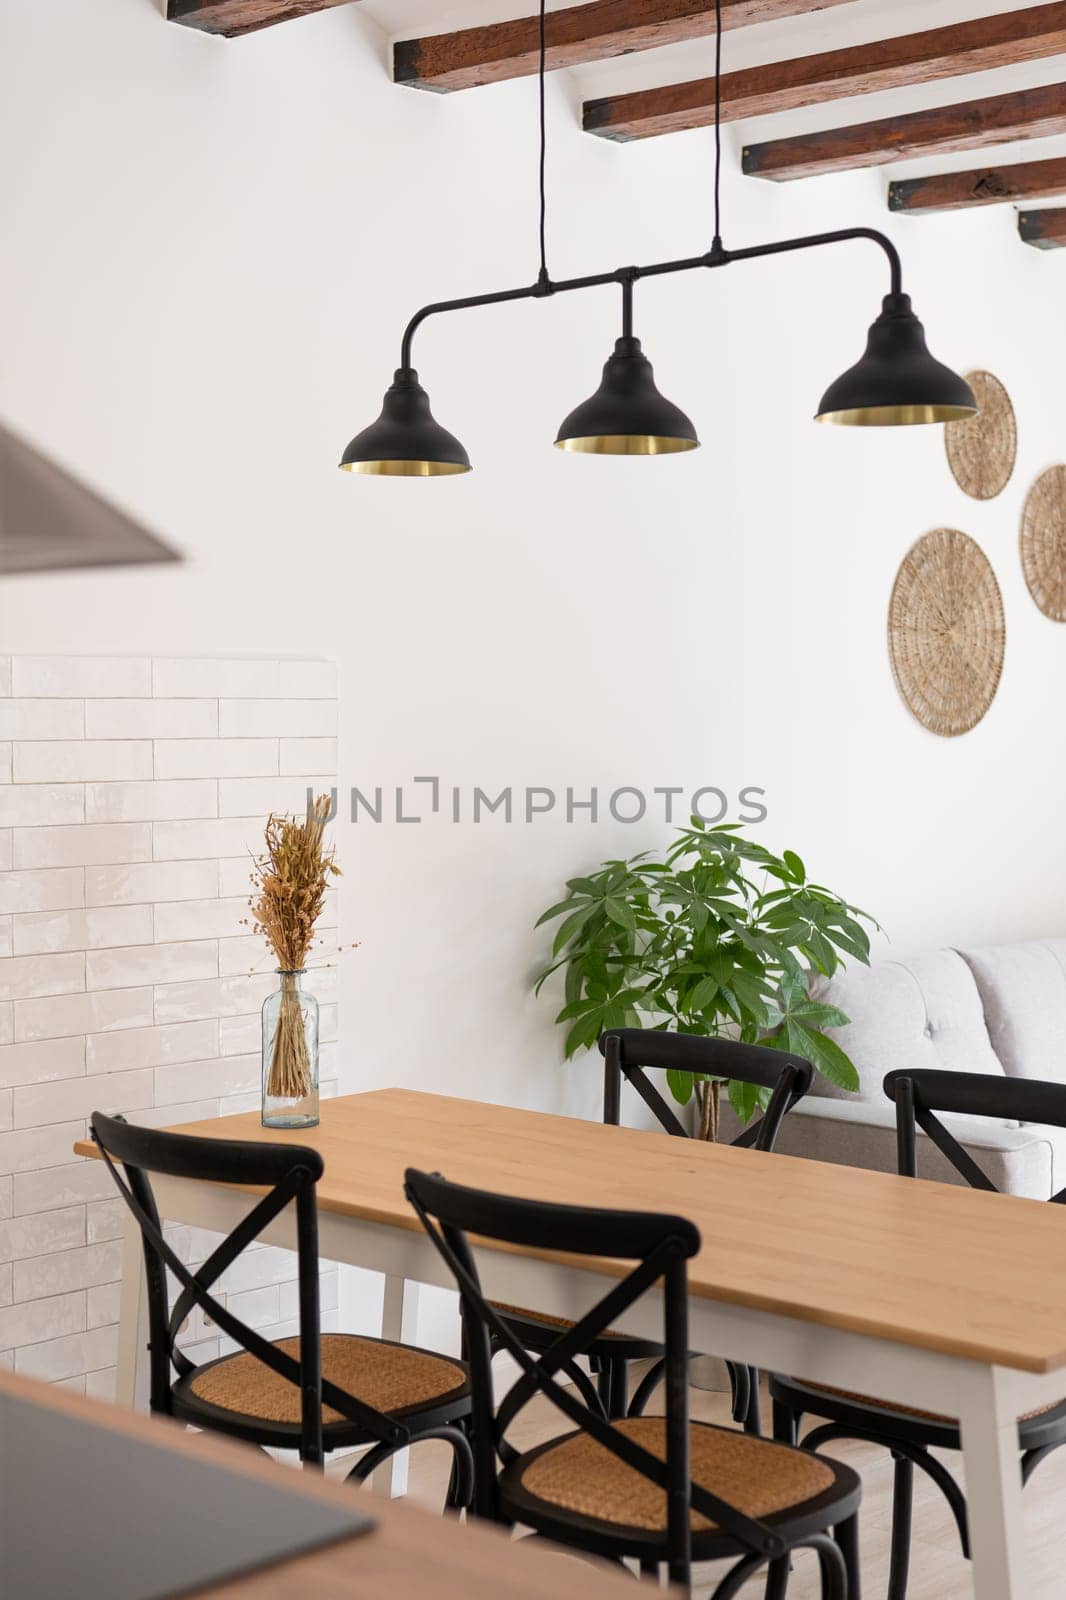 Metal chandelier over wooden dining table with chairs in studio apartment. Kitchen area furniture in comfortable interior of residential house